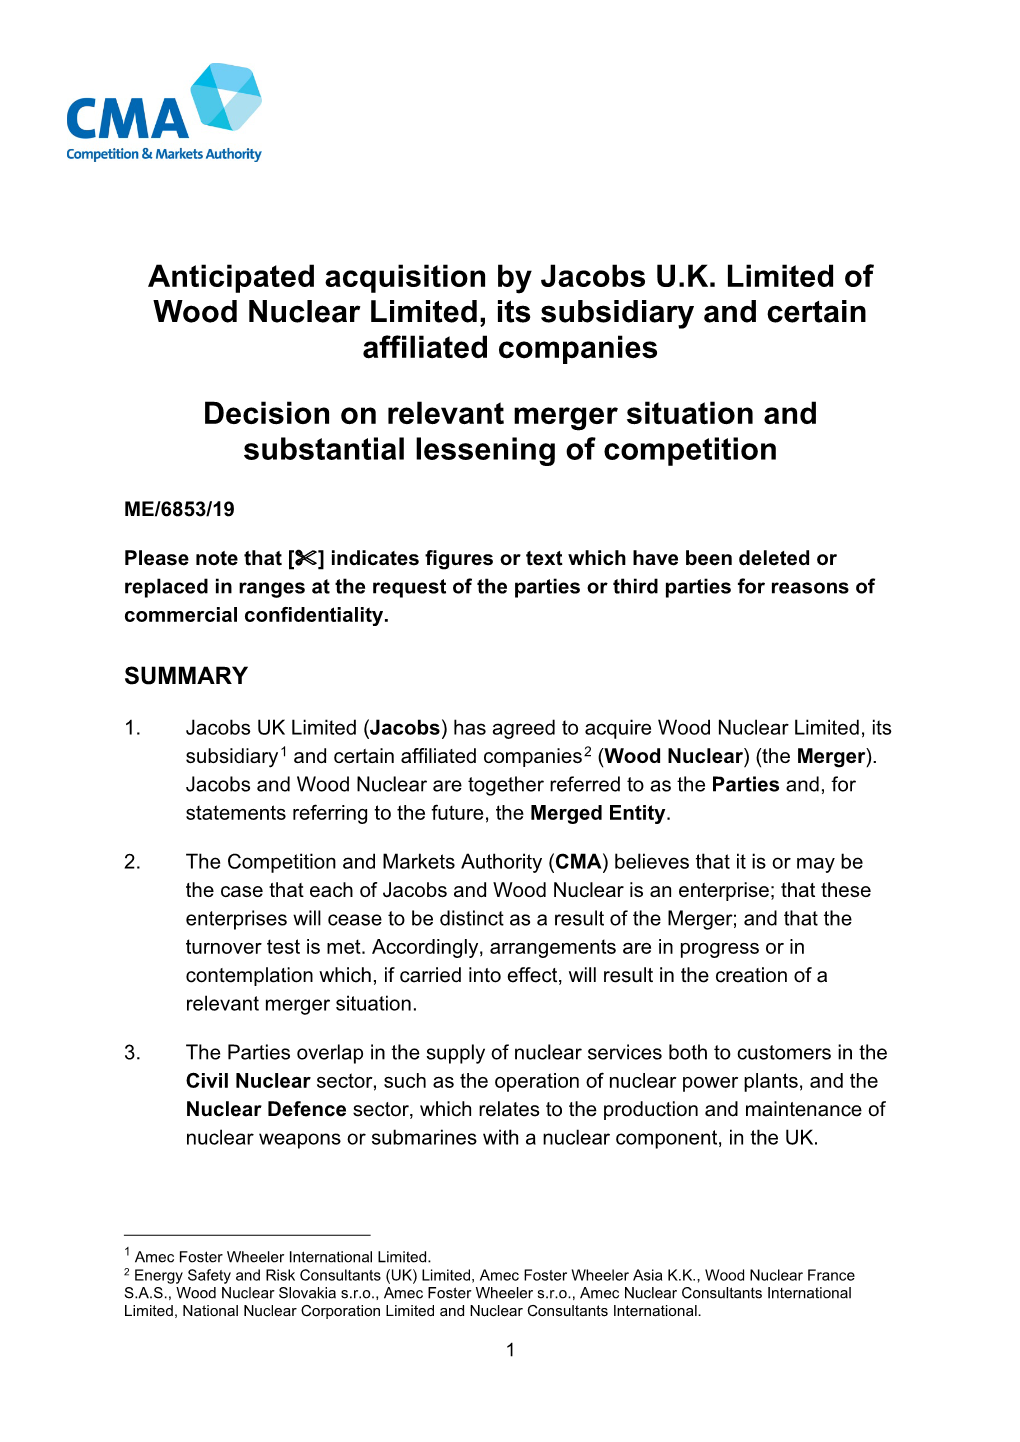 Anticipated Acquisition by Jacobs U.K. Limited of Wood Nuclear Limited, Its Subsidiary and Certain Affiliated Companies